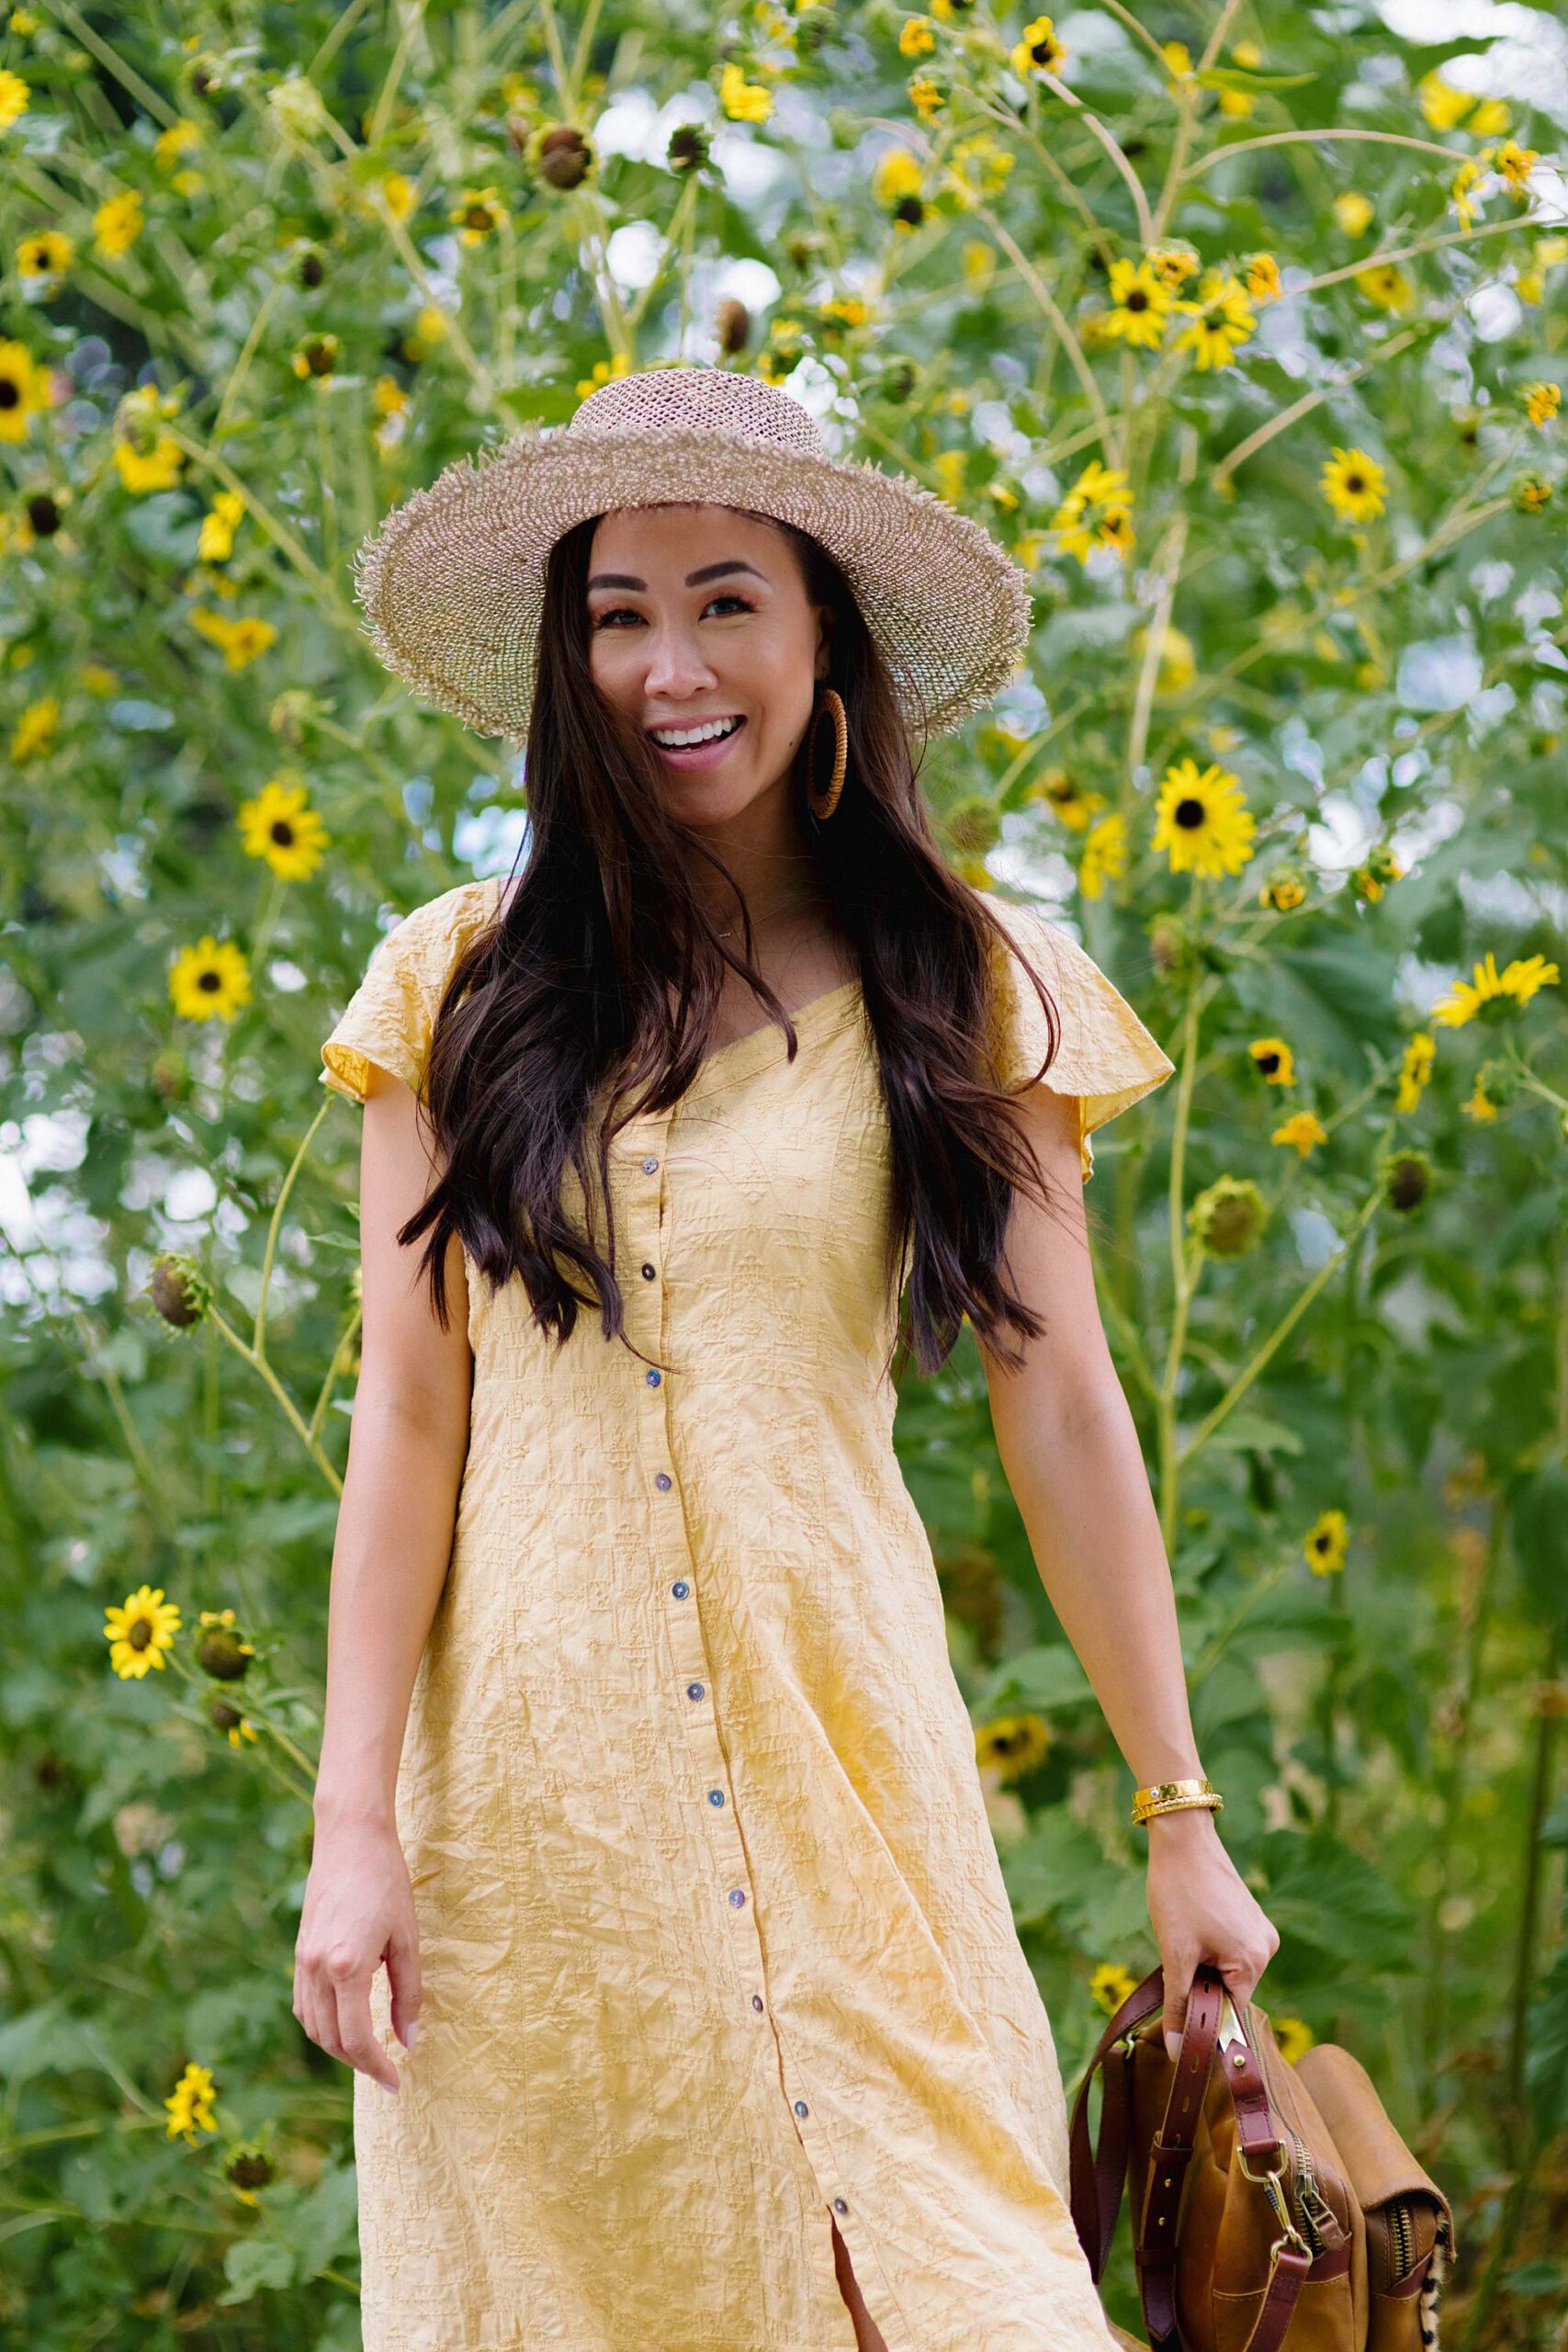 odd Molly Capri dress in yellow standing in front of sunflowers